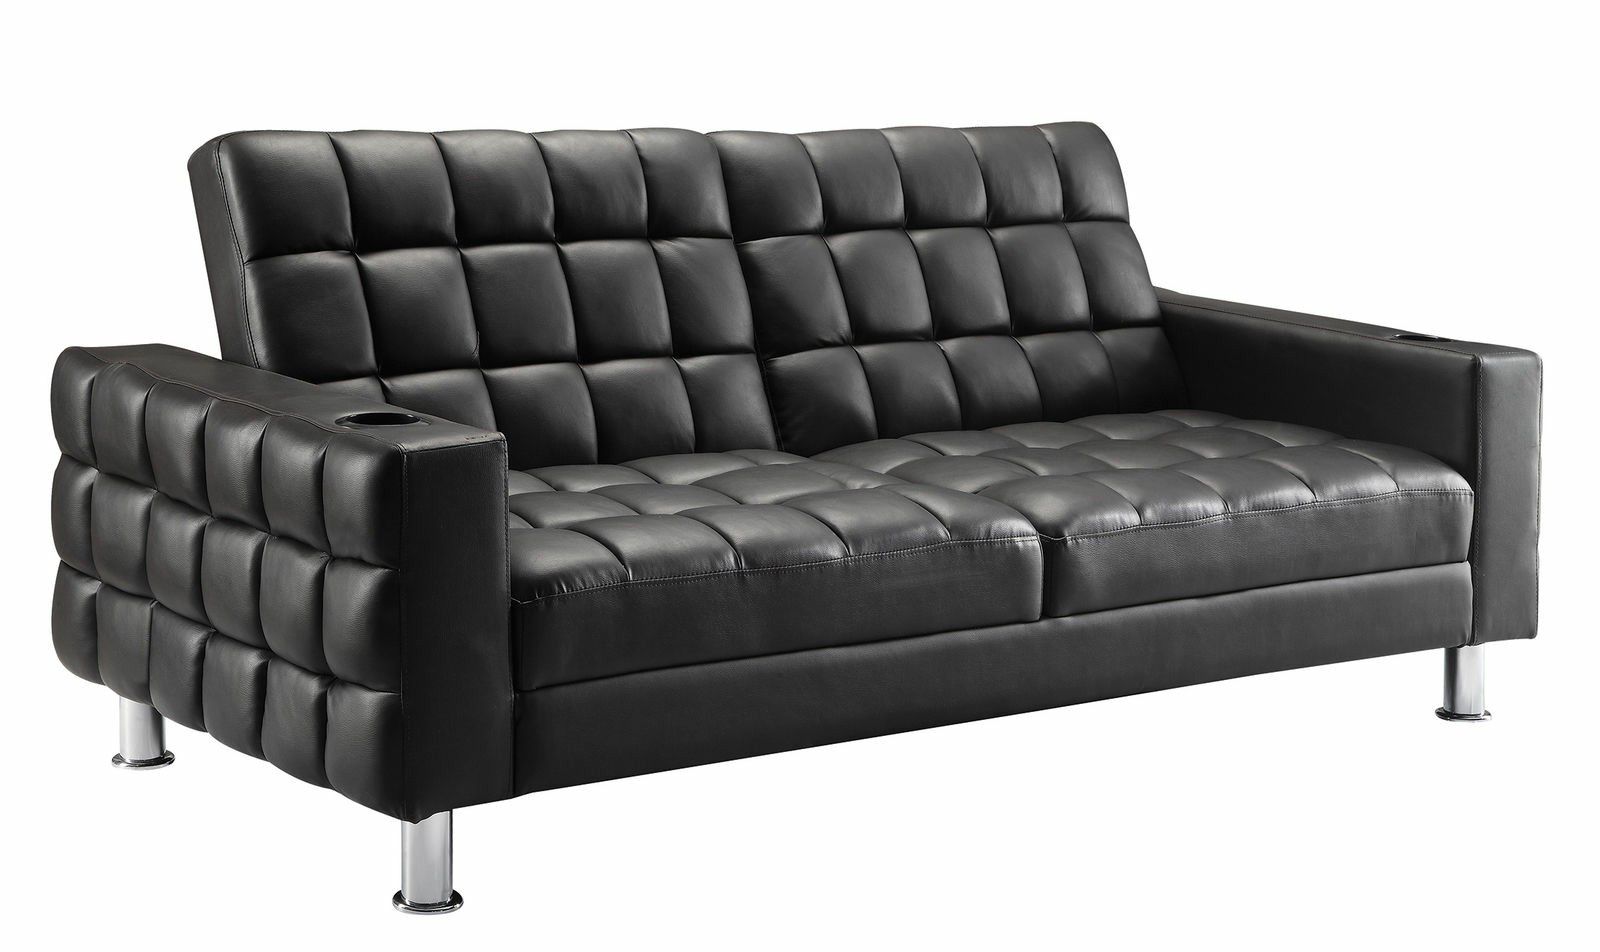 NEW Modern Dark Brown Leather Tufted Sofa Bed Sleeper futon w/ cup holders